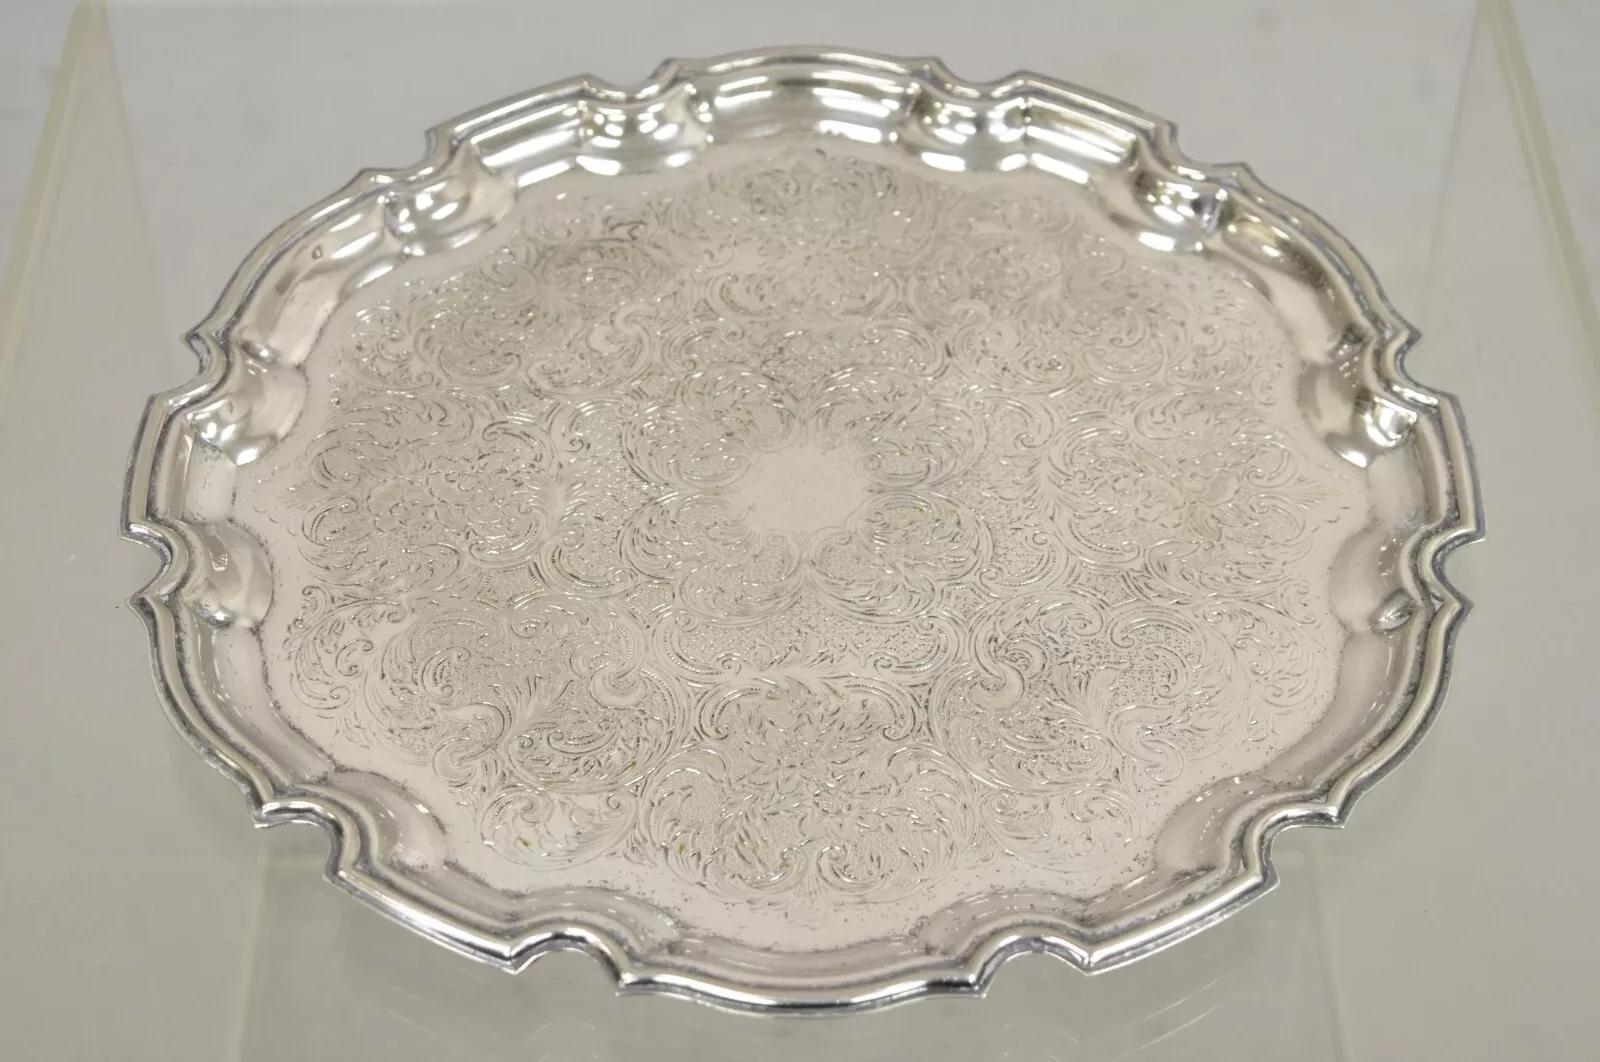 Cavalier England Victorian Silver Plated Scalloped Serving Platter Tray. Circa Mid 20th Century. Measurements: 0.5